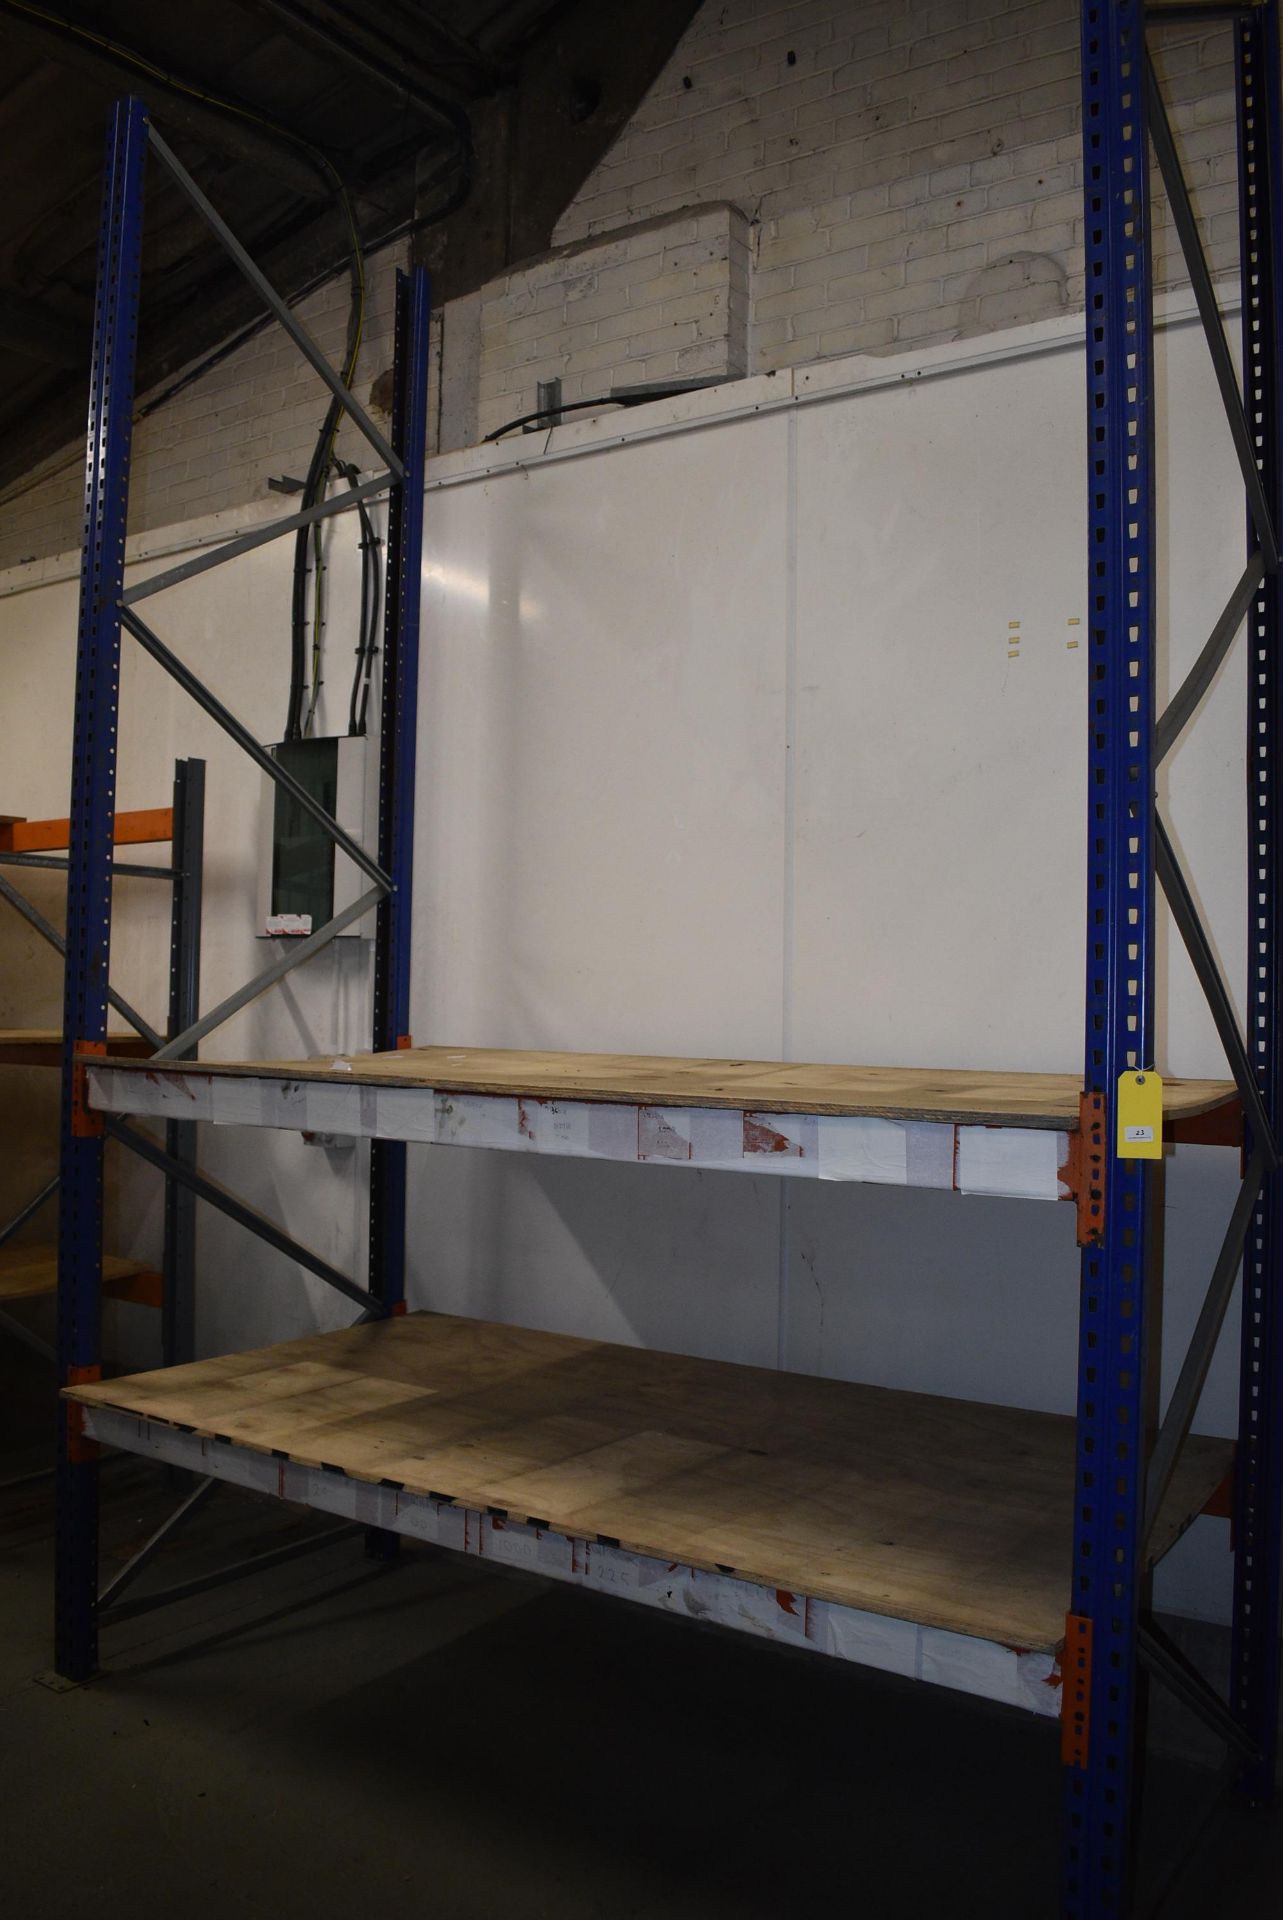 Bay of Dexion M Racking 110x230cm x 370cm high Comprising of Two Uprights and Four Beams (contents